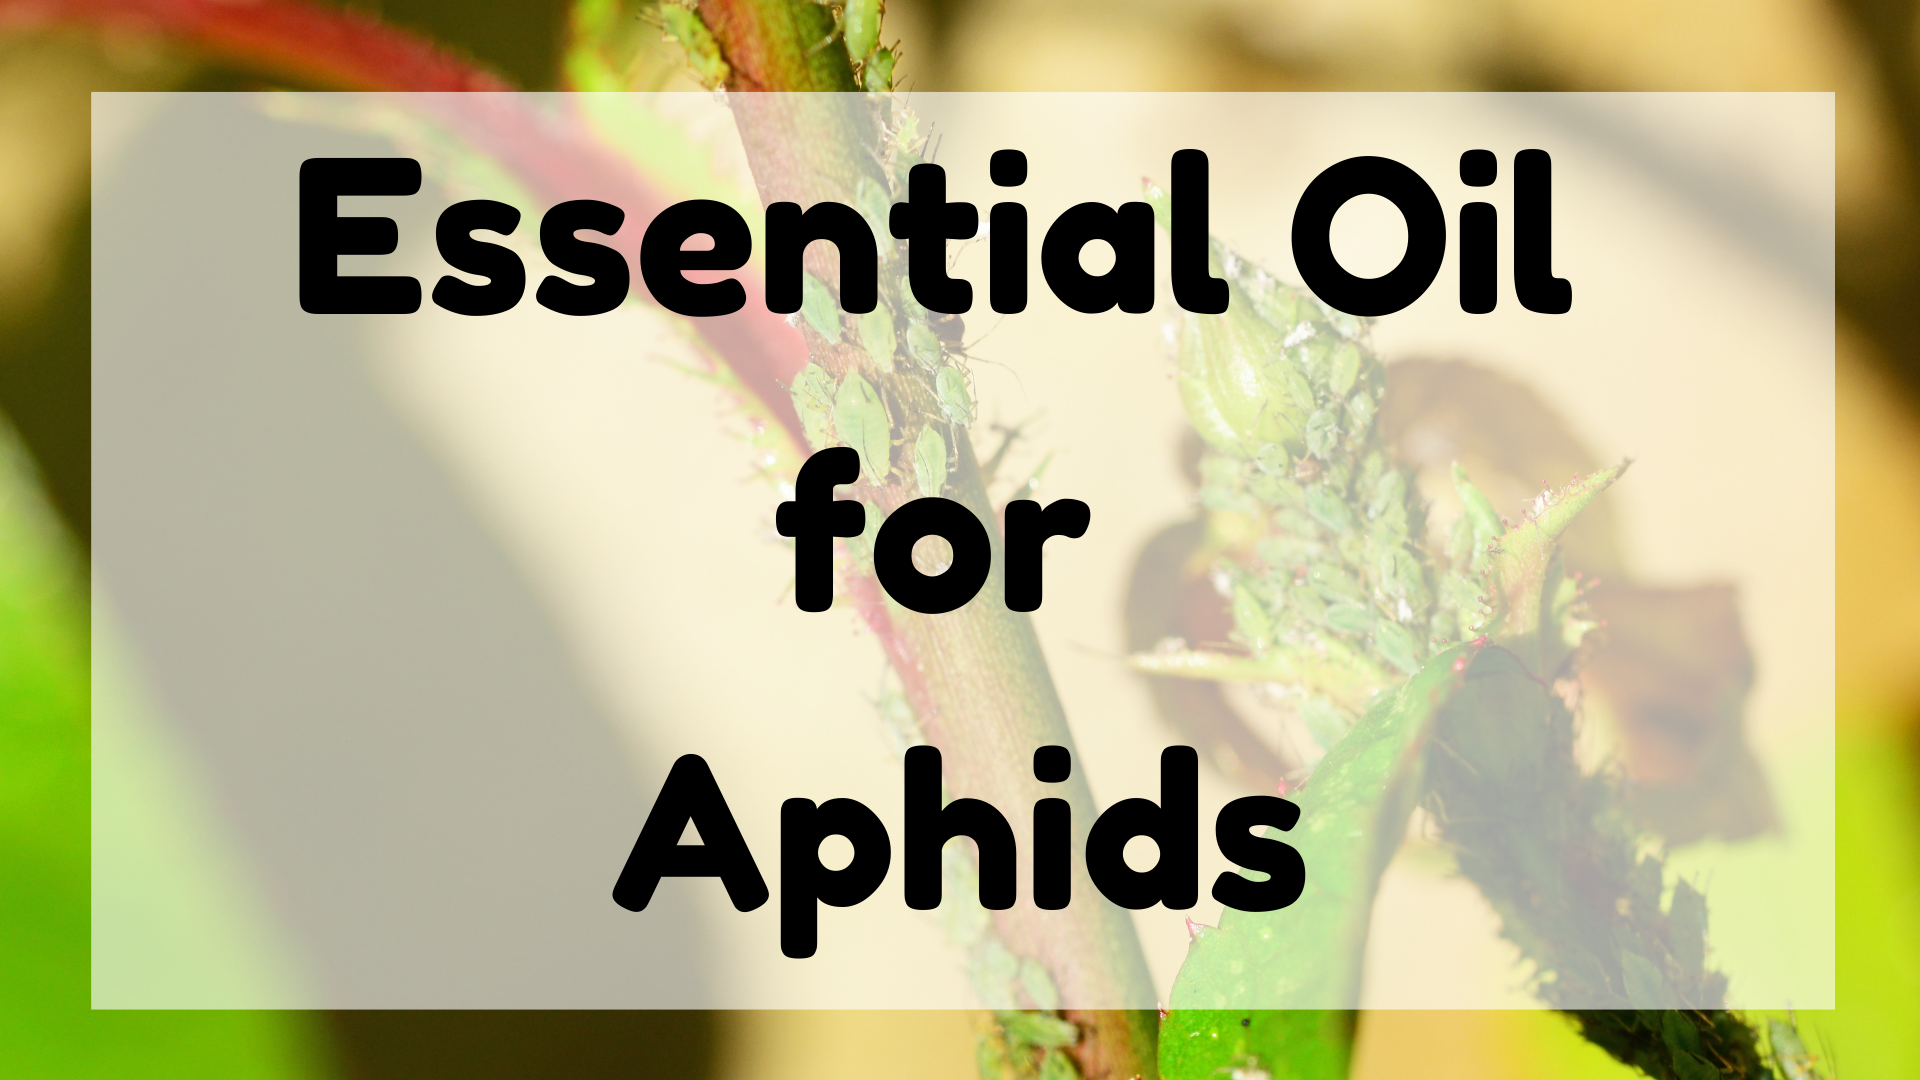 Essential Oil for Aphids featured image